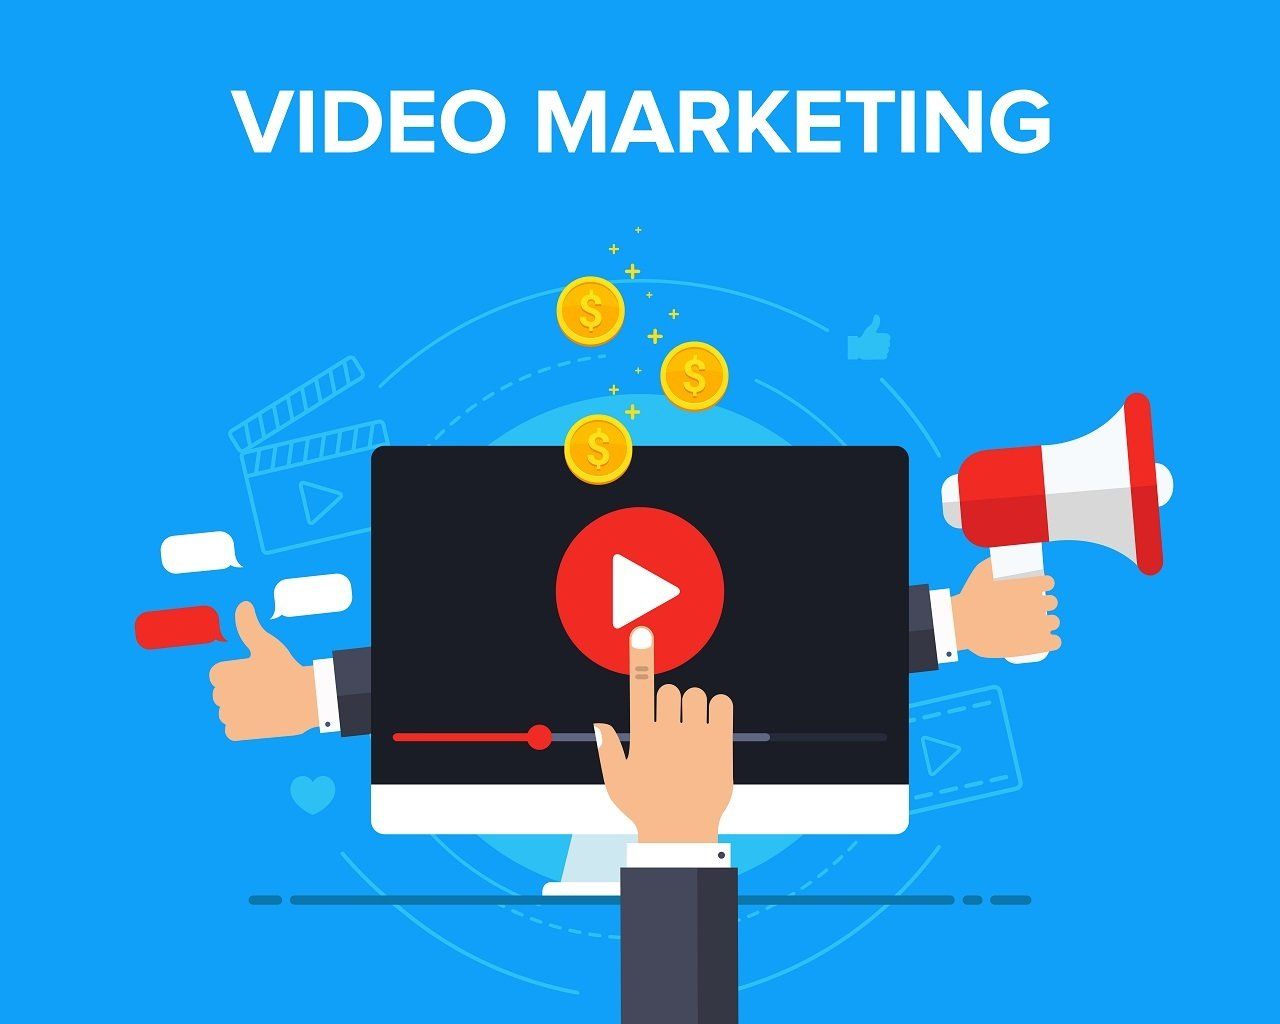 How To Use Video Marketing To Promote Your Law Firm?